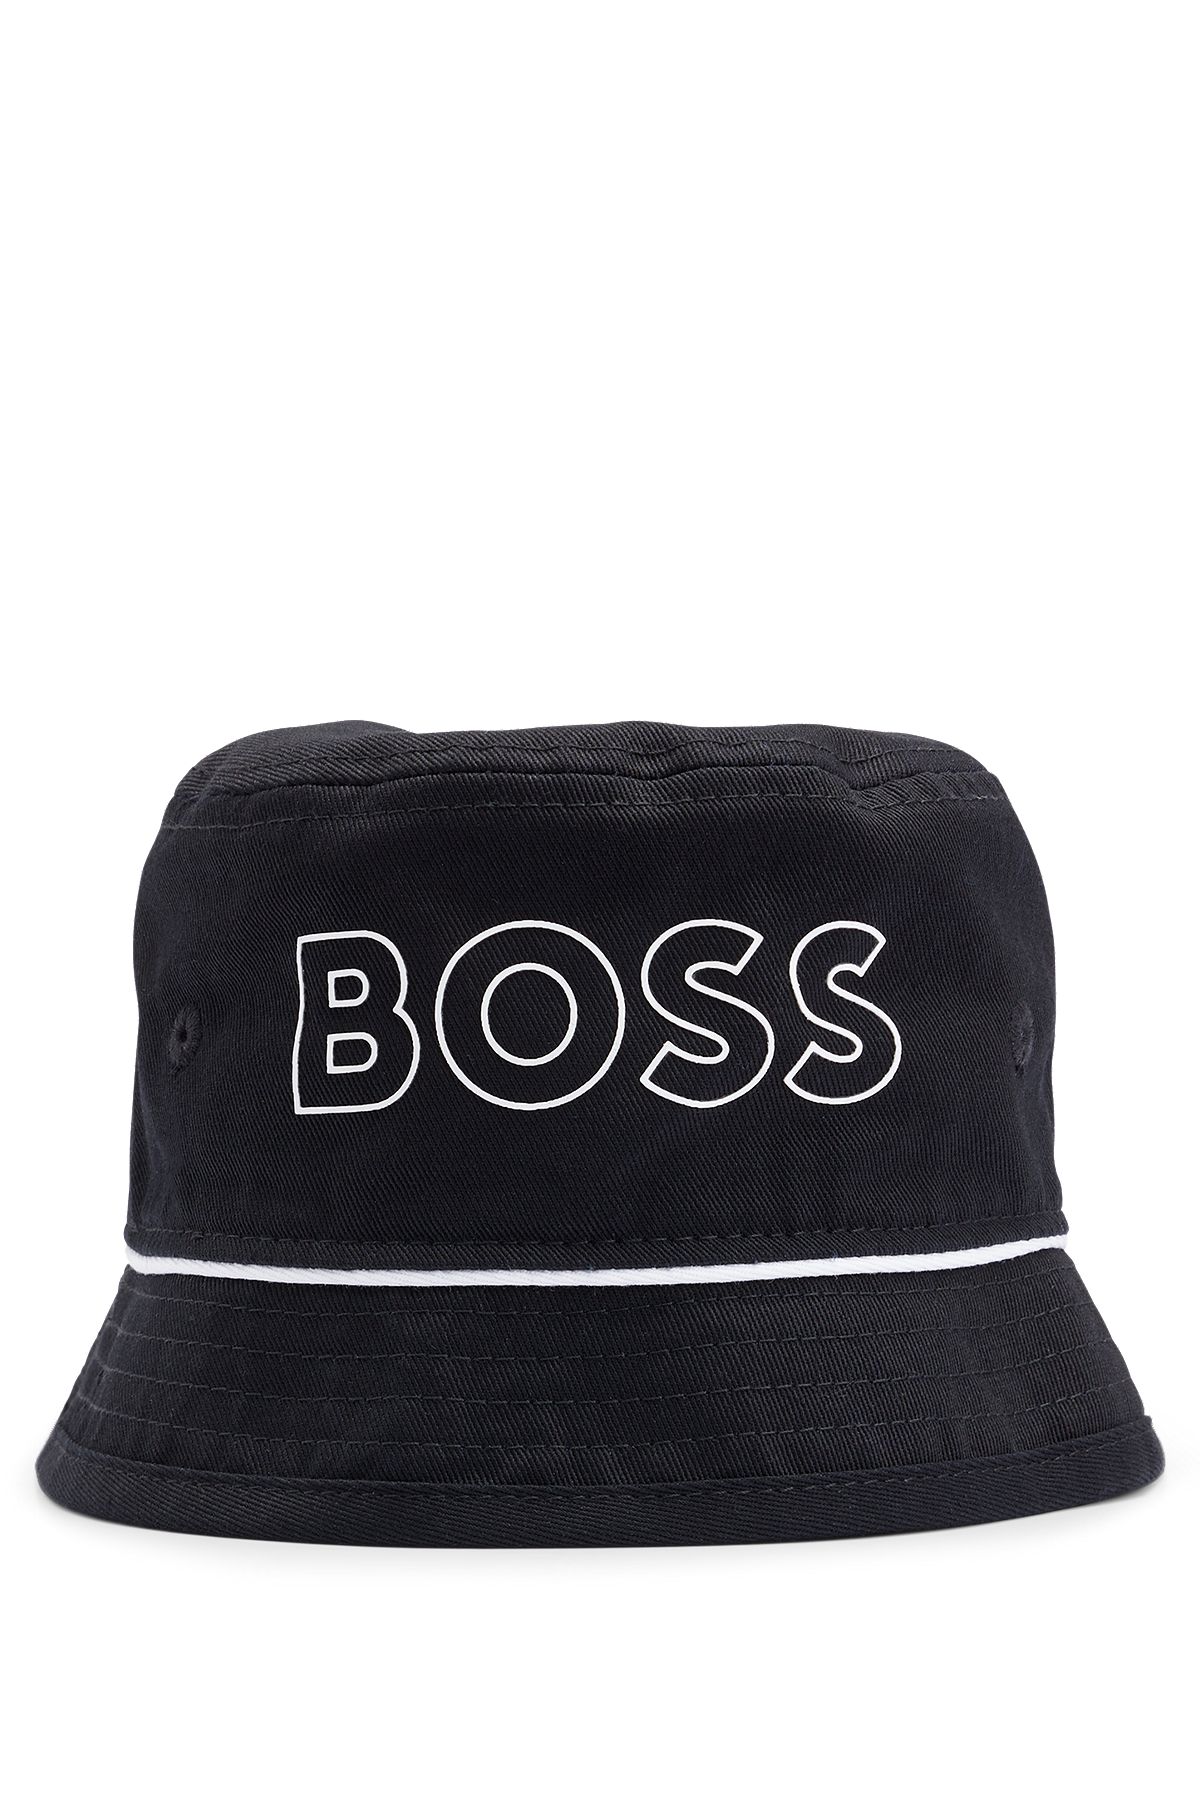 Kids' bucket hat in cotton twill with contrast logo, Black